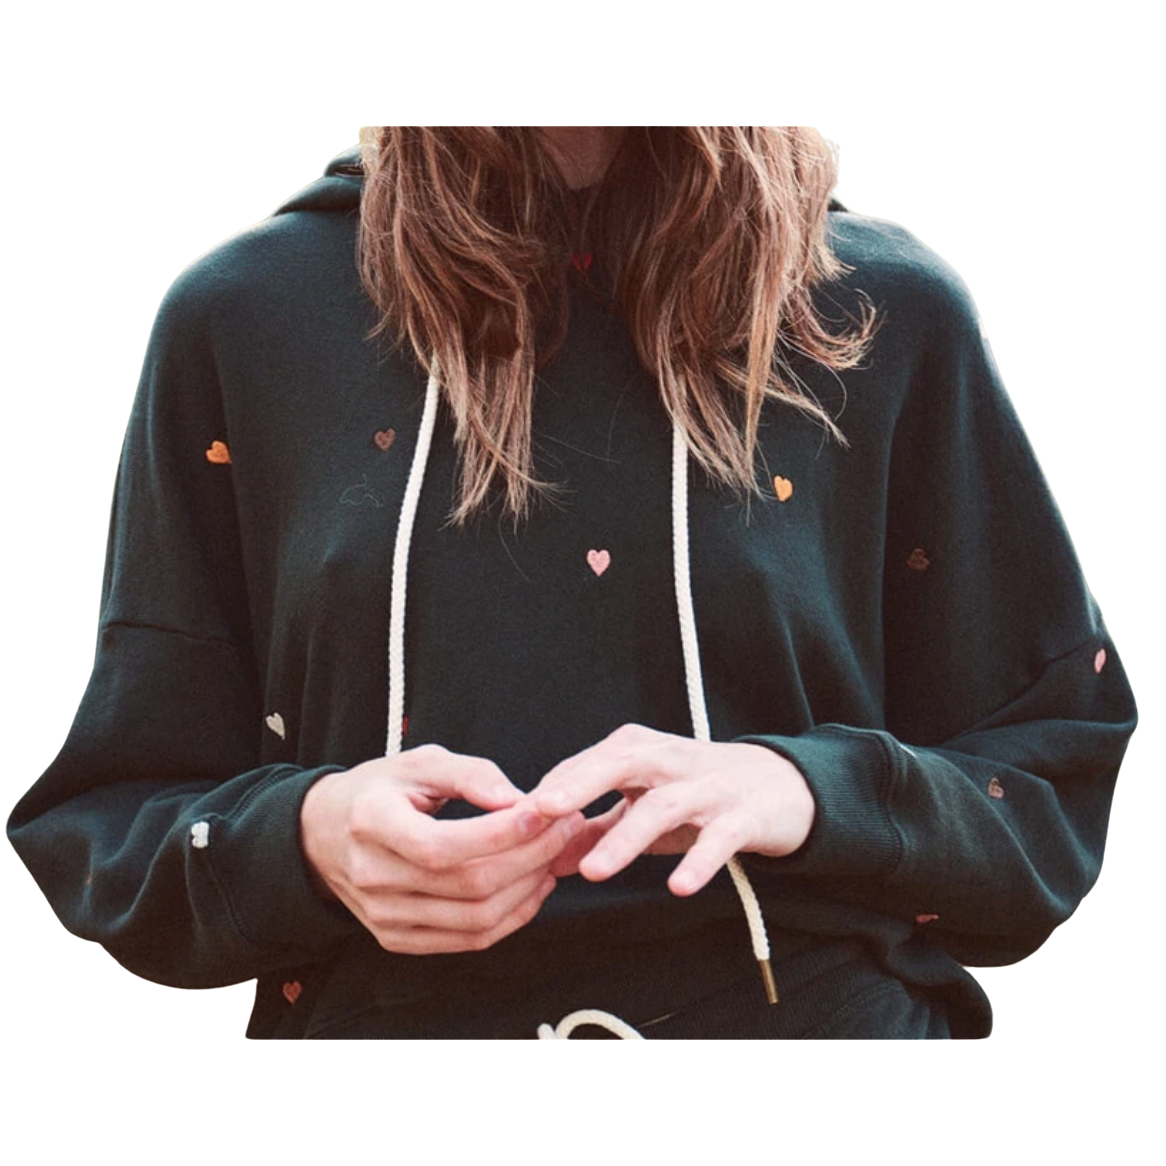 Load image into Gallery viewer, The GREAT Teammate Dark Alpine w/ Embroidered Hearts Hoodie
